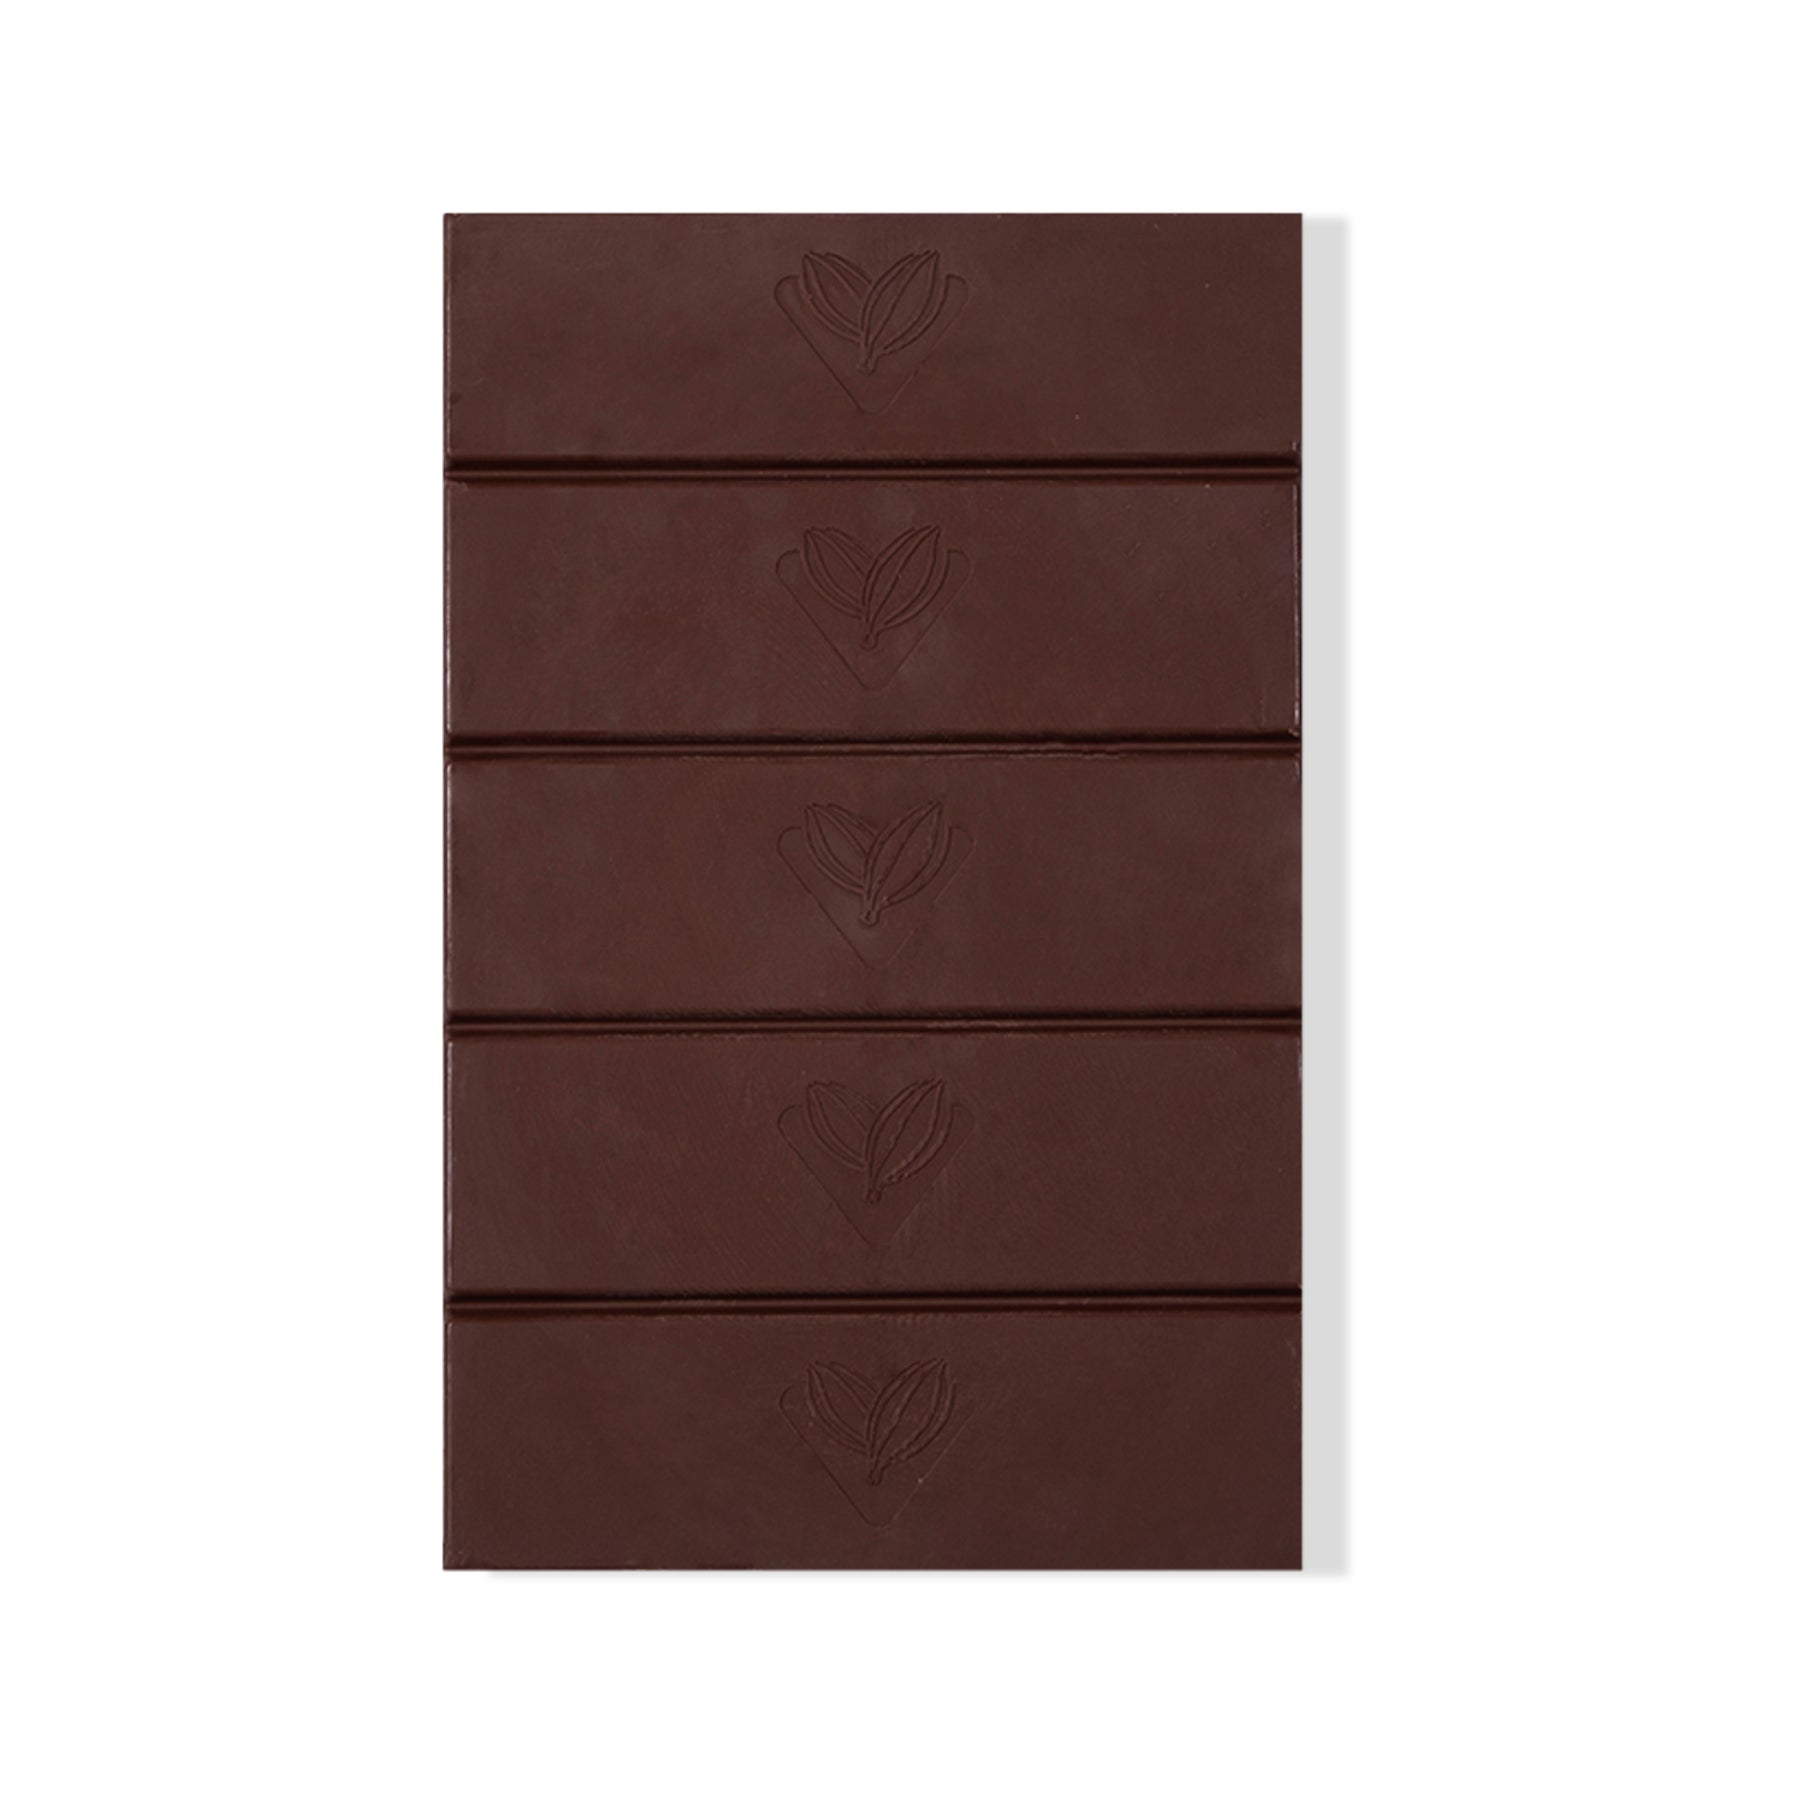 Product view of Tulip Dark Compound Chocolate 1kg (SKU: 8994592305587)